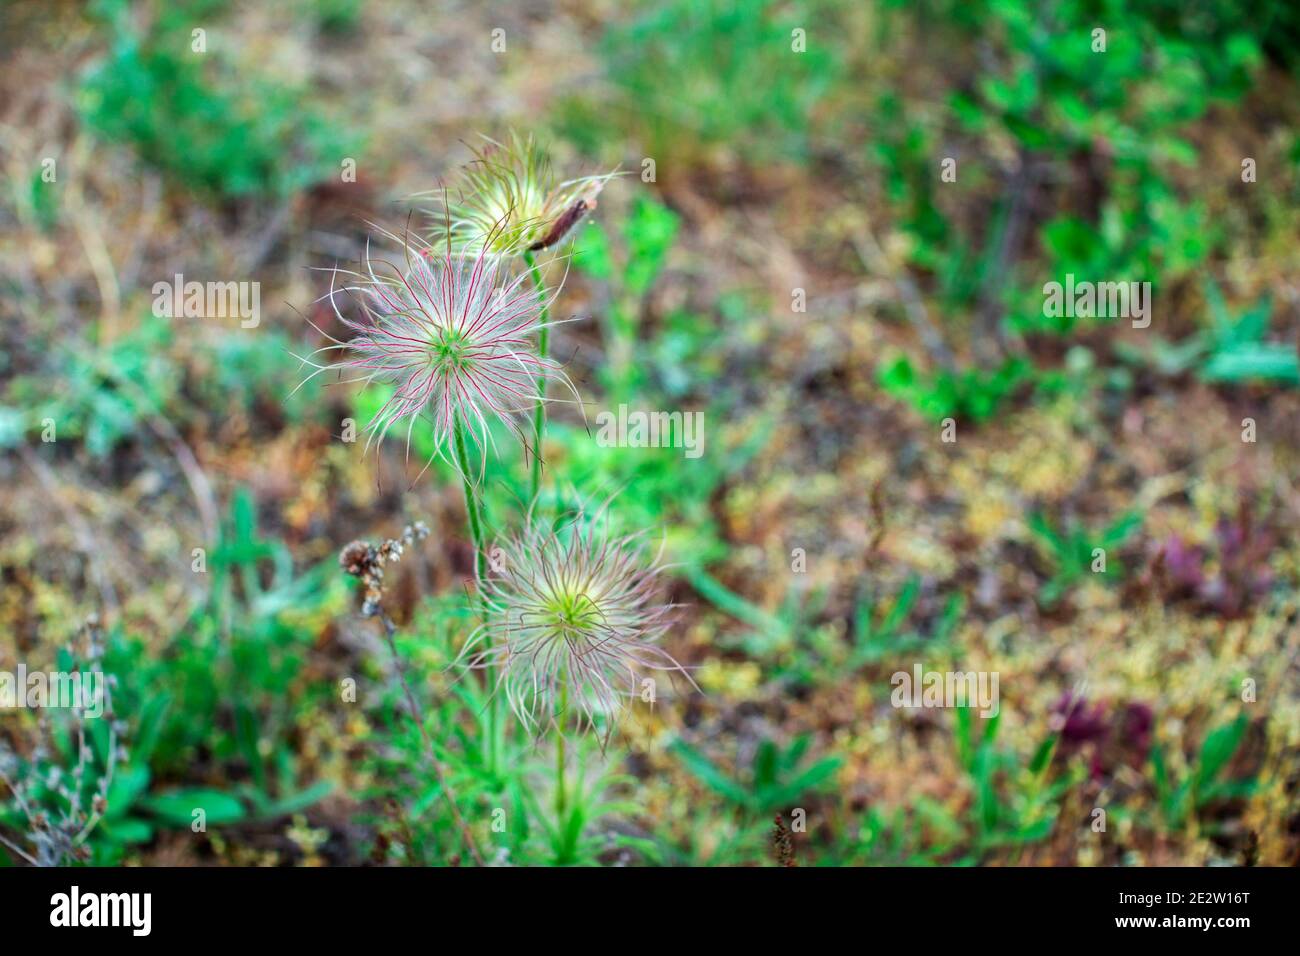 Alpine anemone fruits. Pulsatilla alpine plant, growing on the meadow. Spring nature. Stock Photo